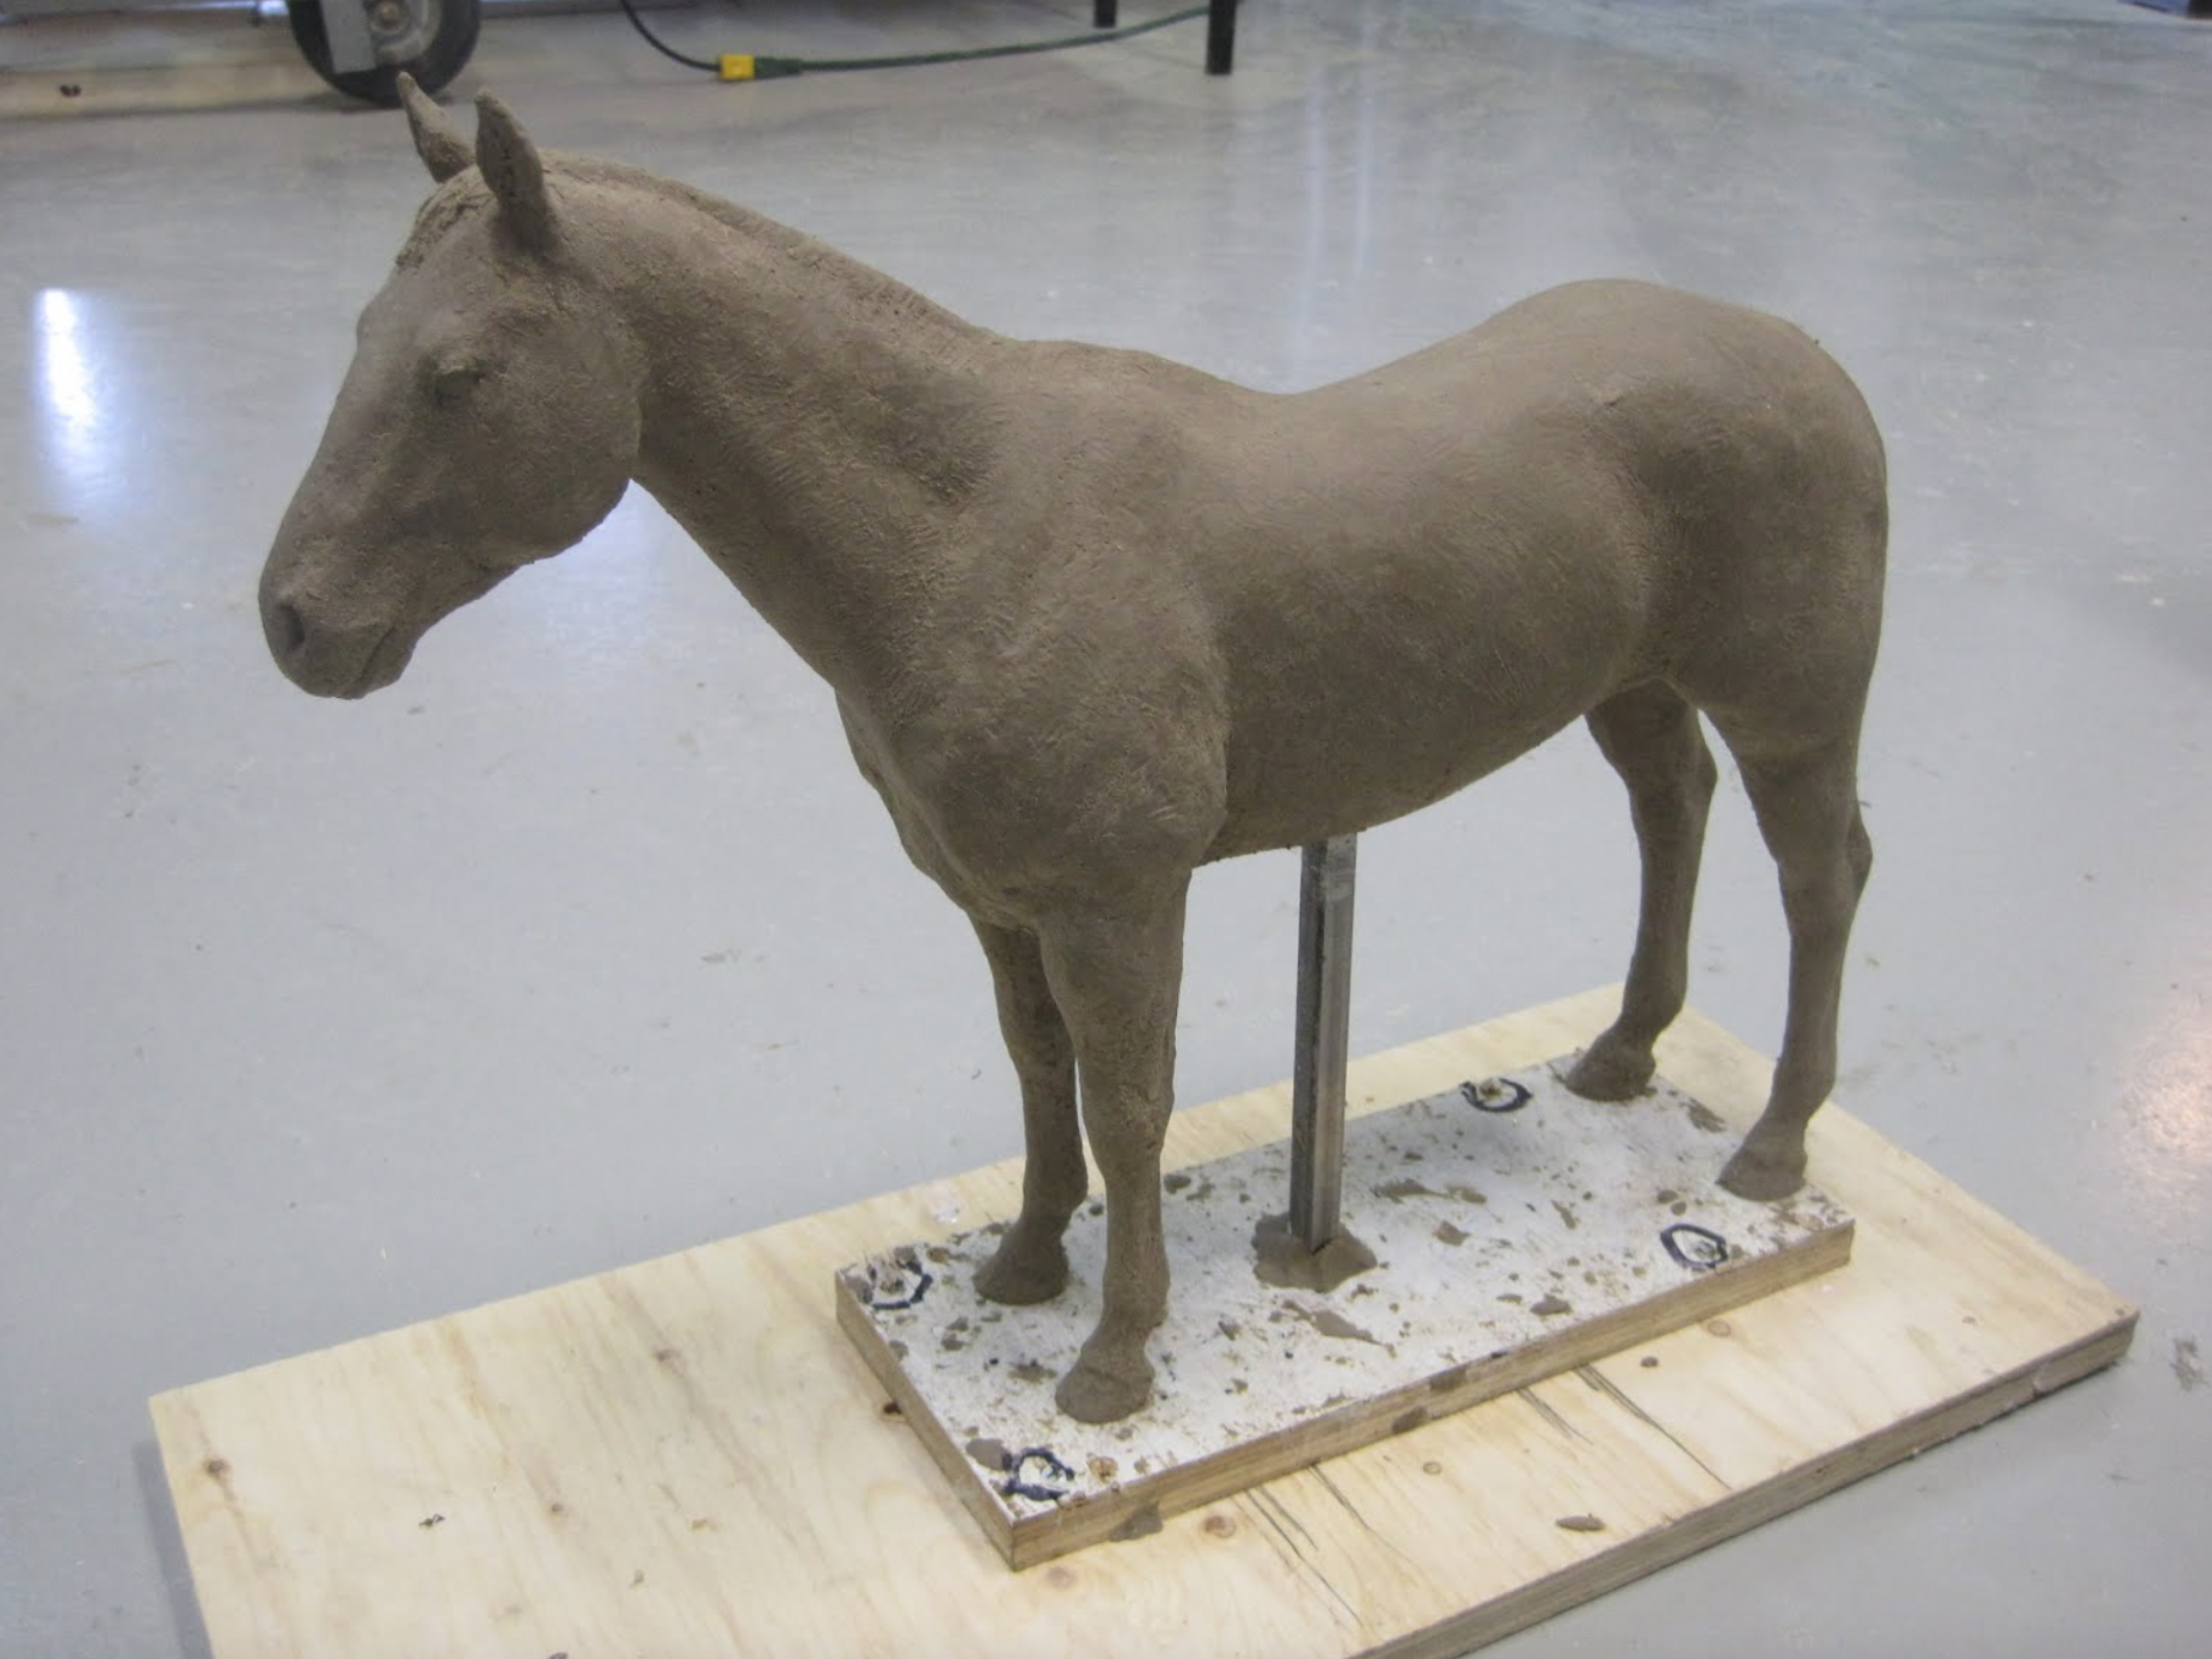  This photo shows the 1/5 scale sculpture of our new equine model. It will be the base for our colic/palpation/belly tap simulator as well as equine venipuncture simulator. It will be reproduced in full scale, then molded and reproduced. The model wa